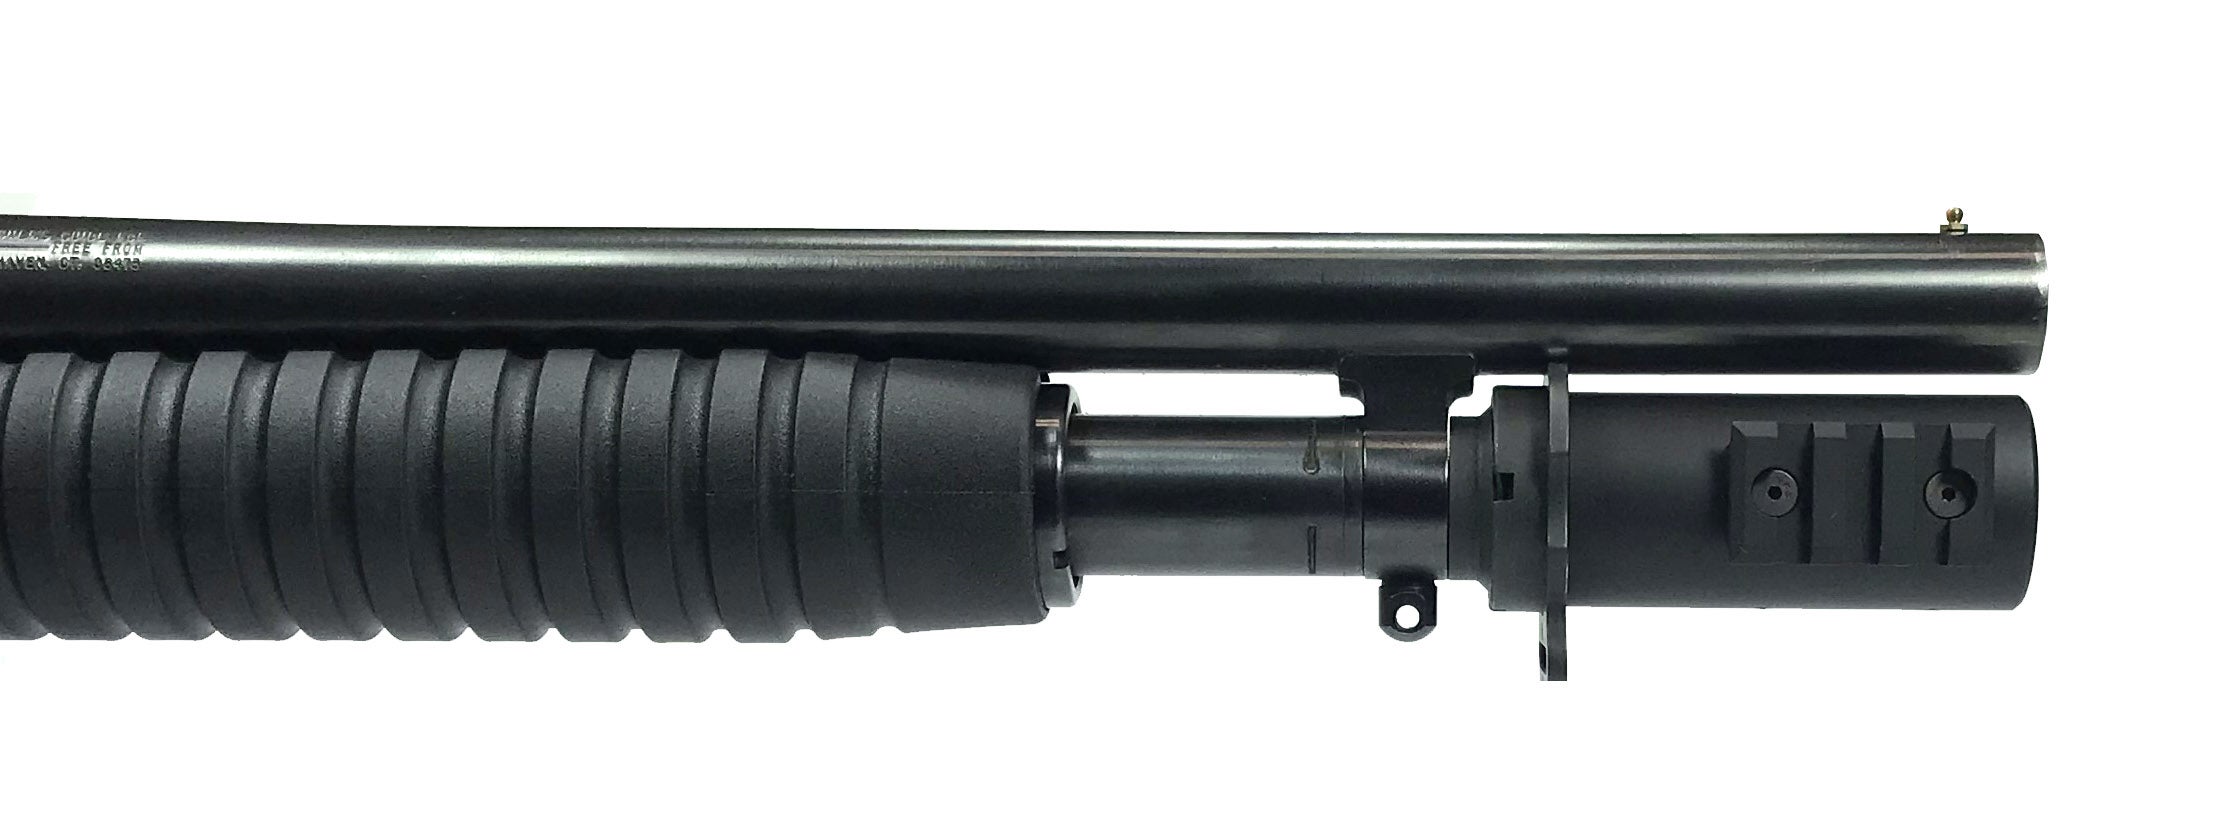 Choate Night Manager accessory mount for Mossberg Model 500. (Image: Choate Machine & Tool)